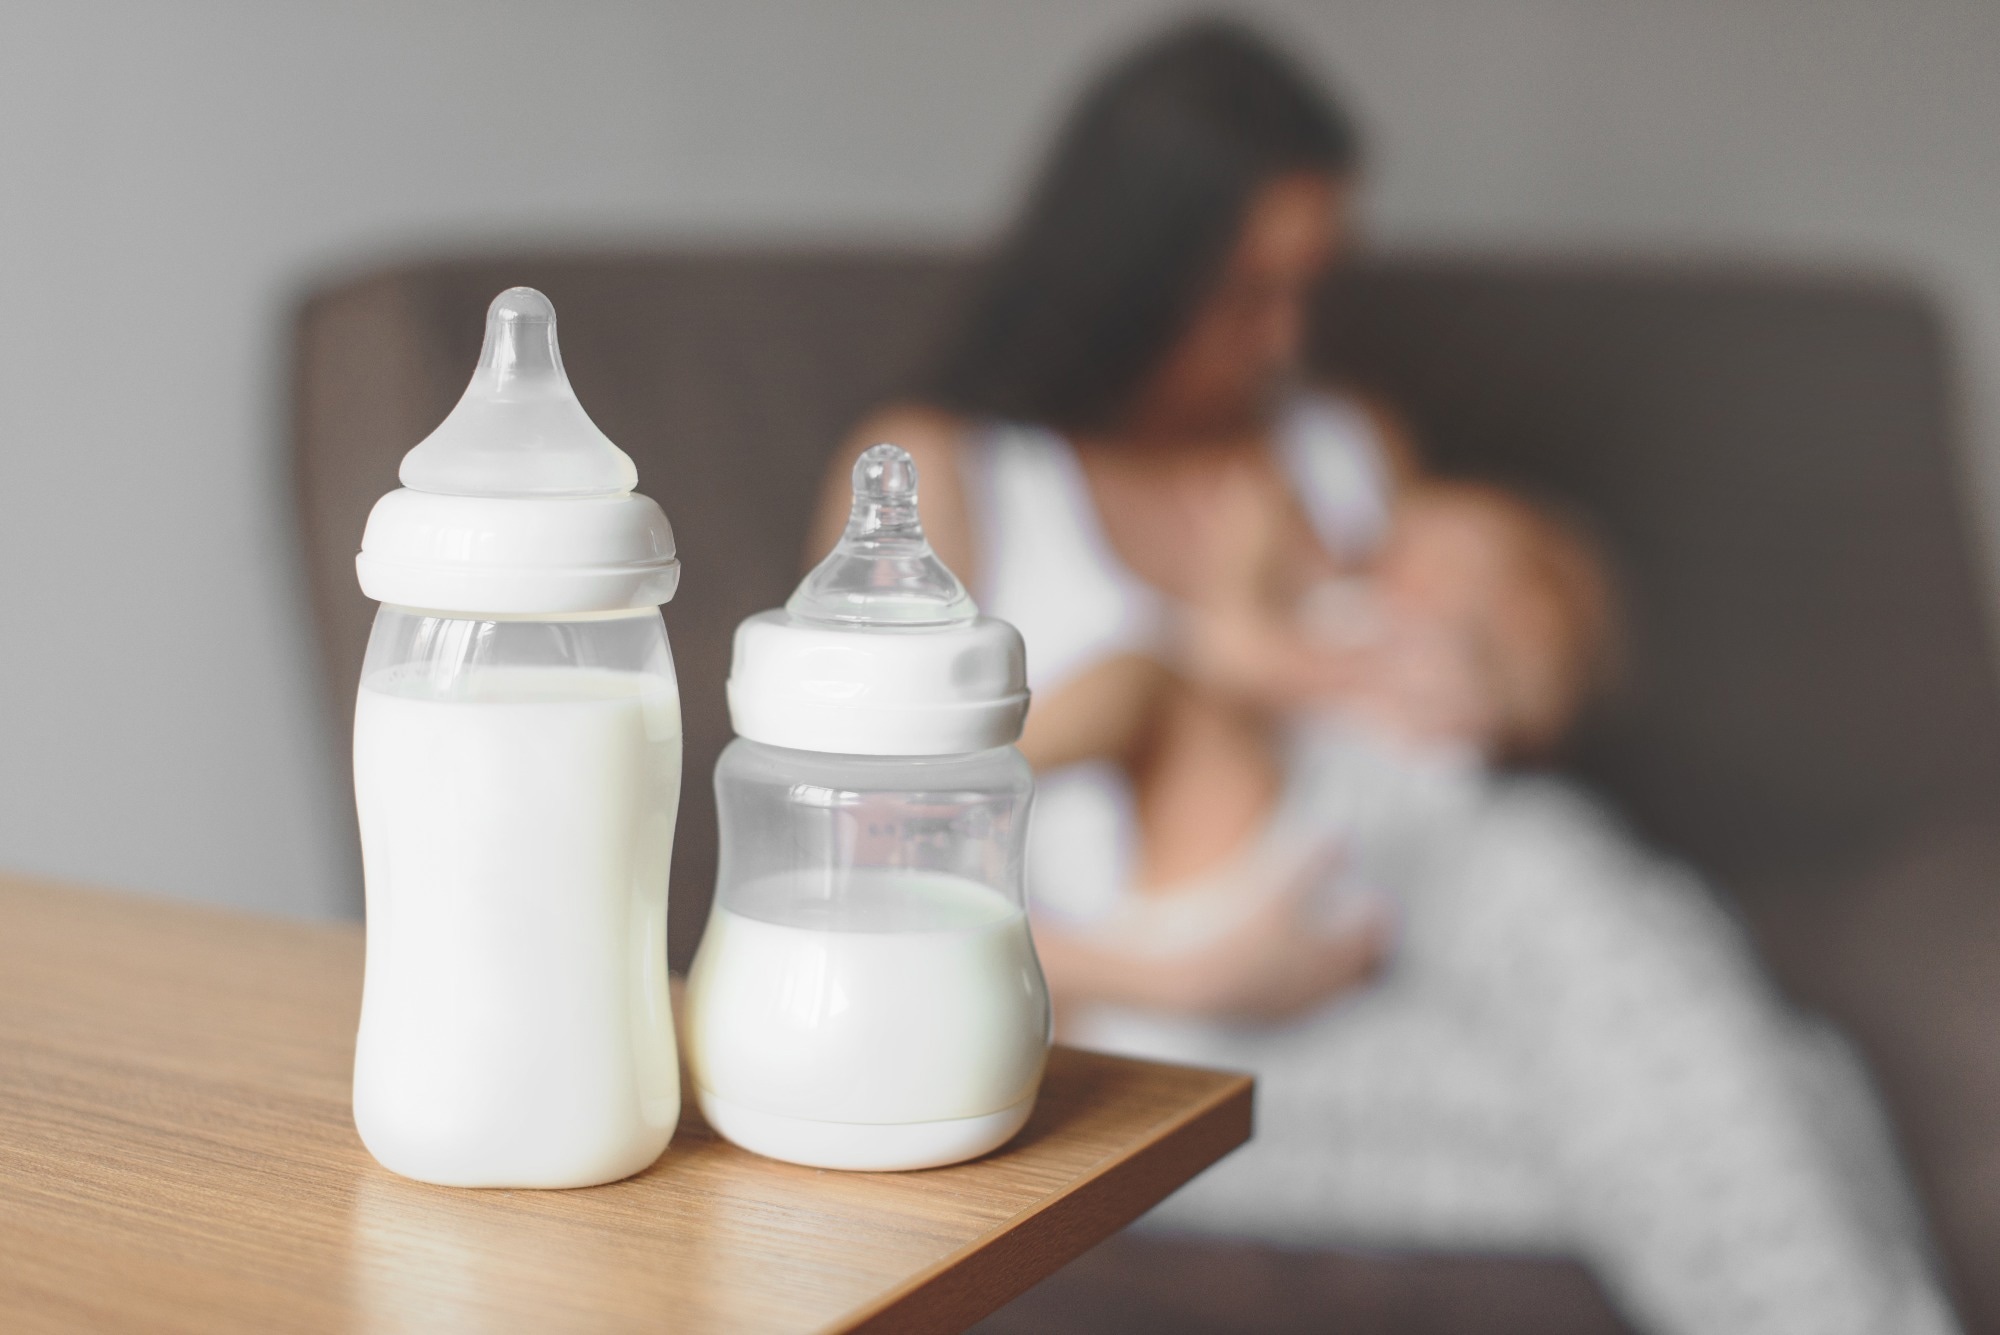 Study: Milk antibody response after 3rd dose of COVID-19 mRNA vaccine and SARS-CoV-2 breakthrough infection and implications for infant protection. Image Credit: evso/Shutterstock